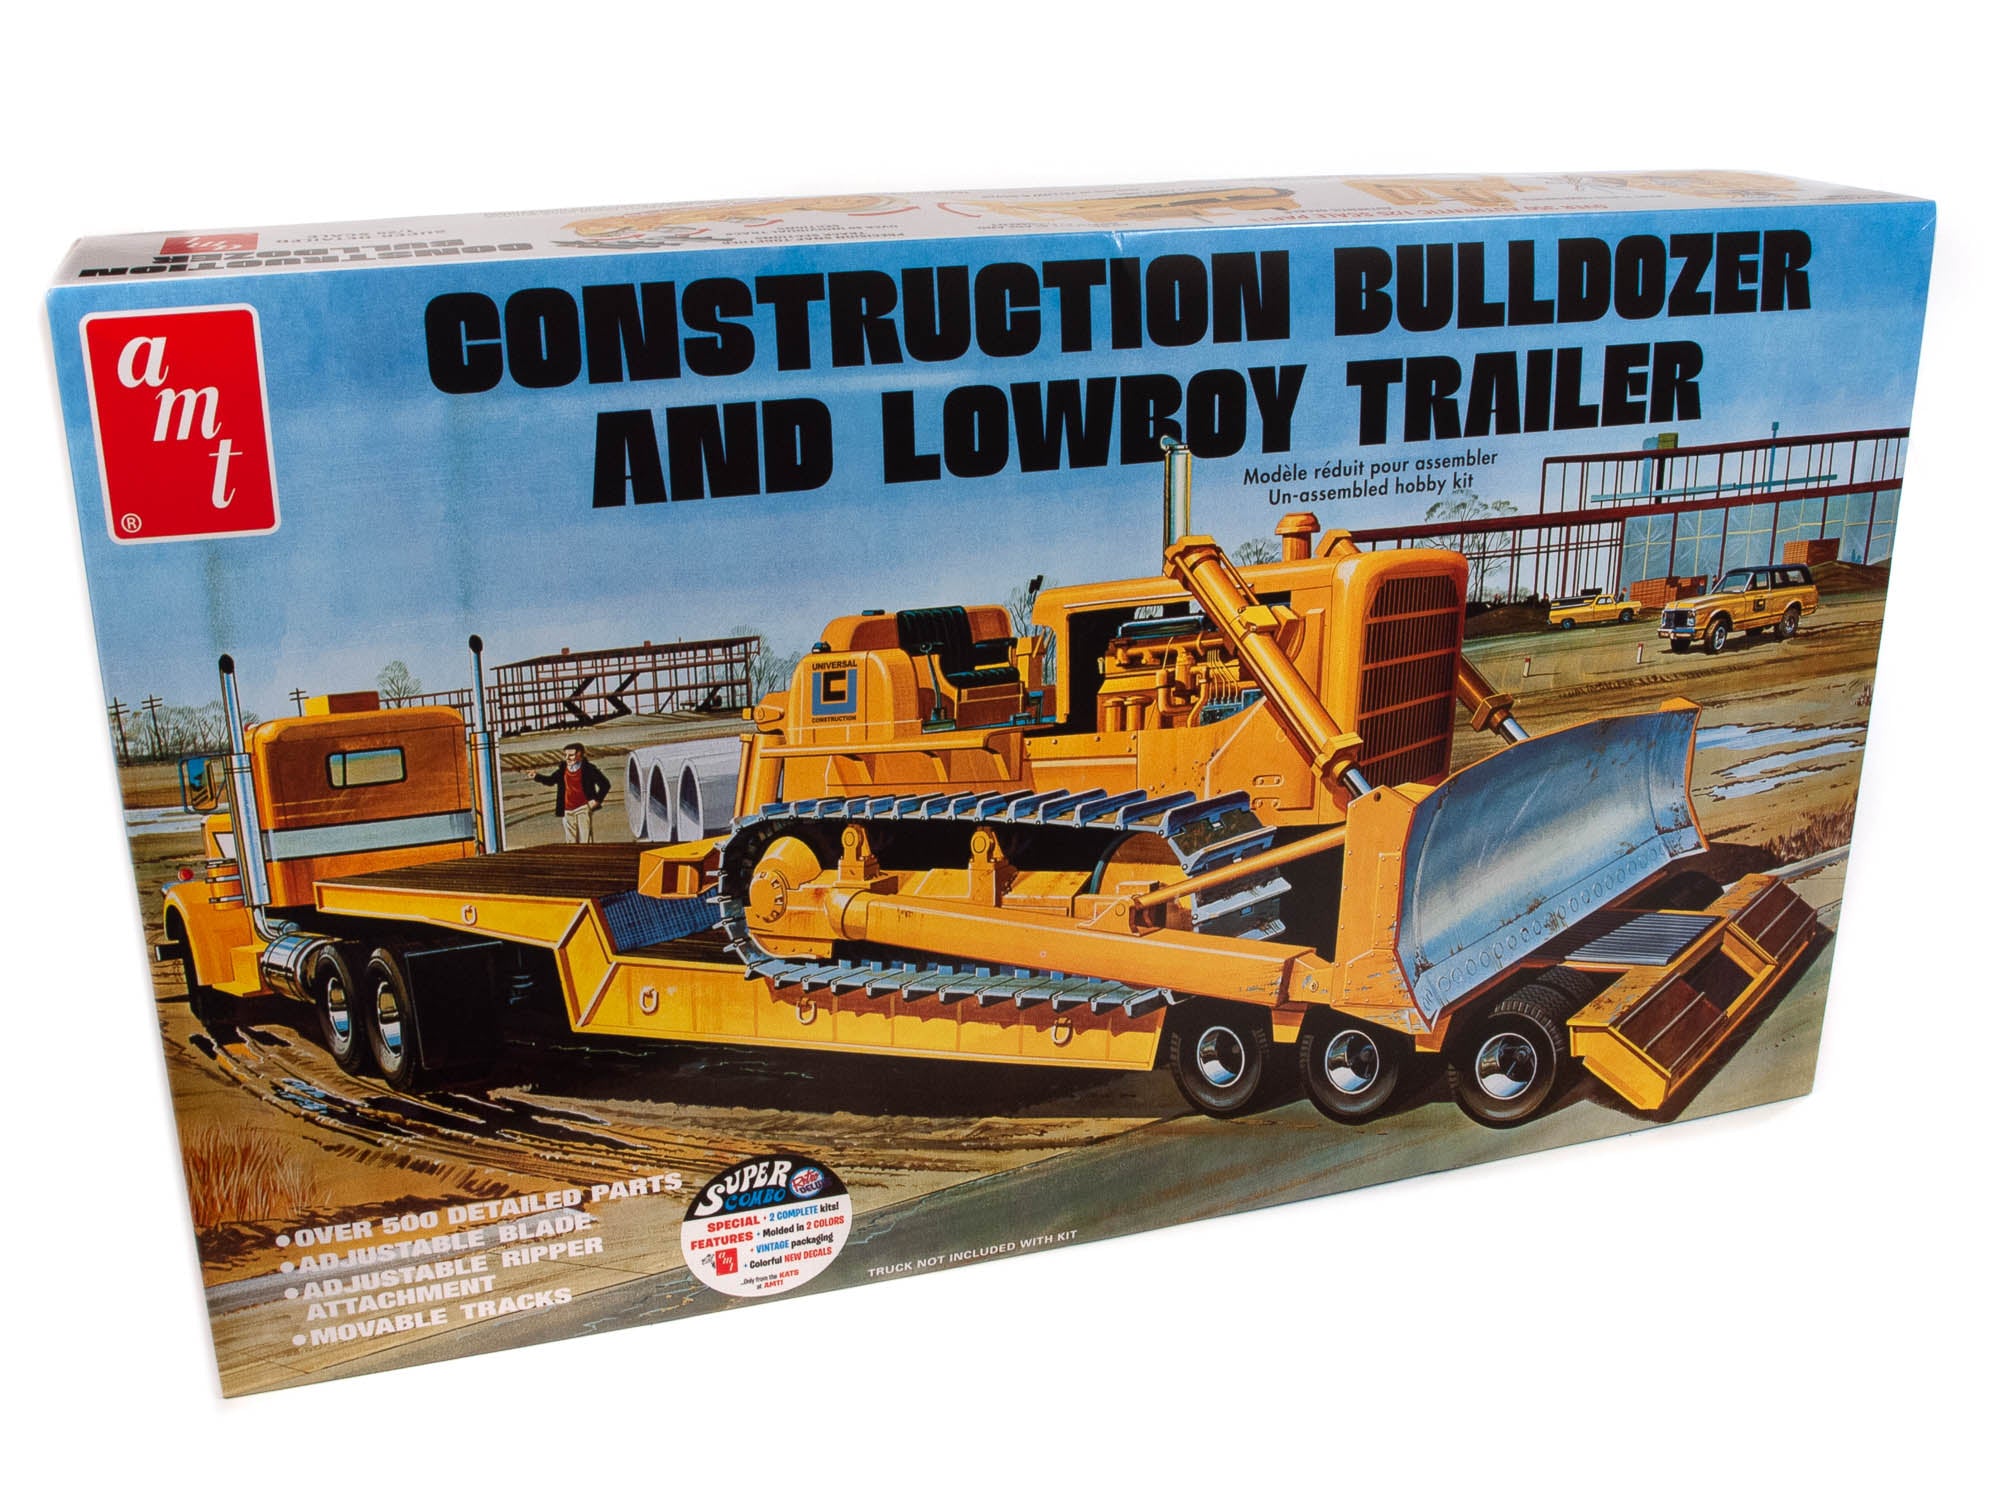 Skill 3 Model Kit Construction Bulldozer and Lowboy Trailer Set of 2 pieces  1/25 Scale Model by AMT